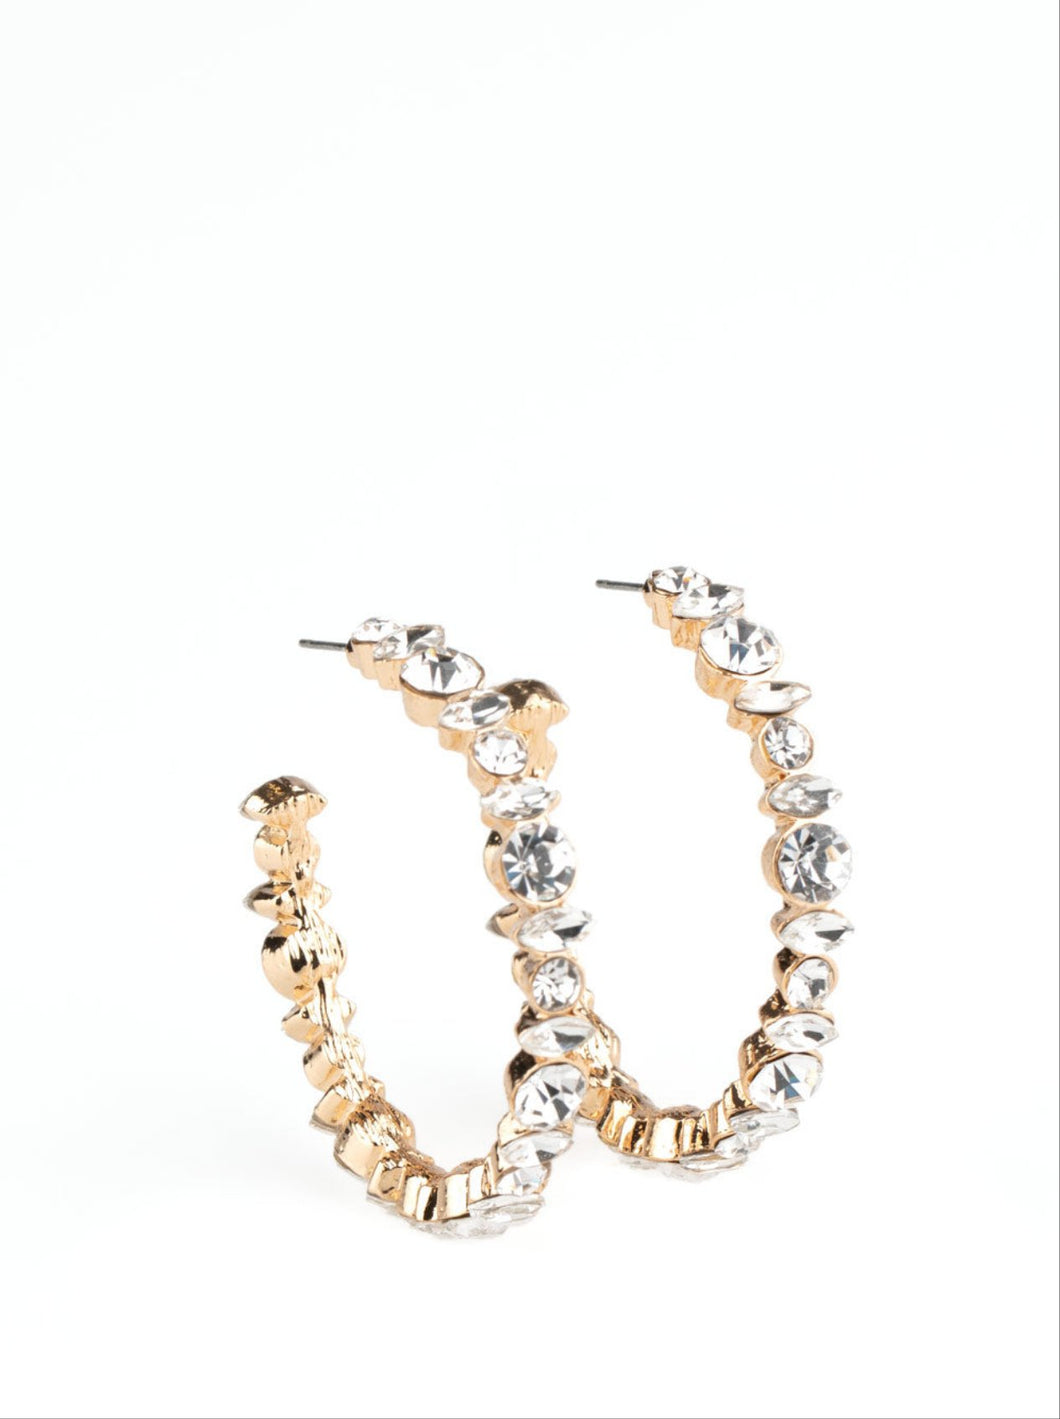 Can I Have Your Attention? Gold and Bling Hoop Earrings